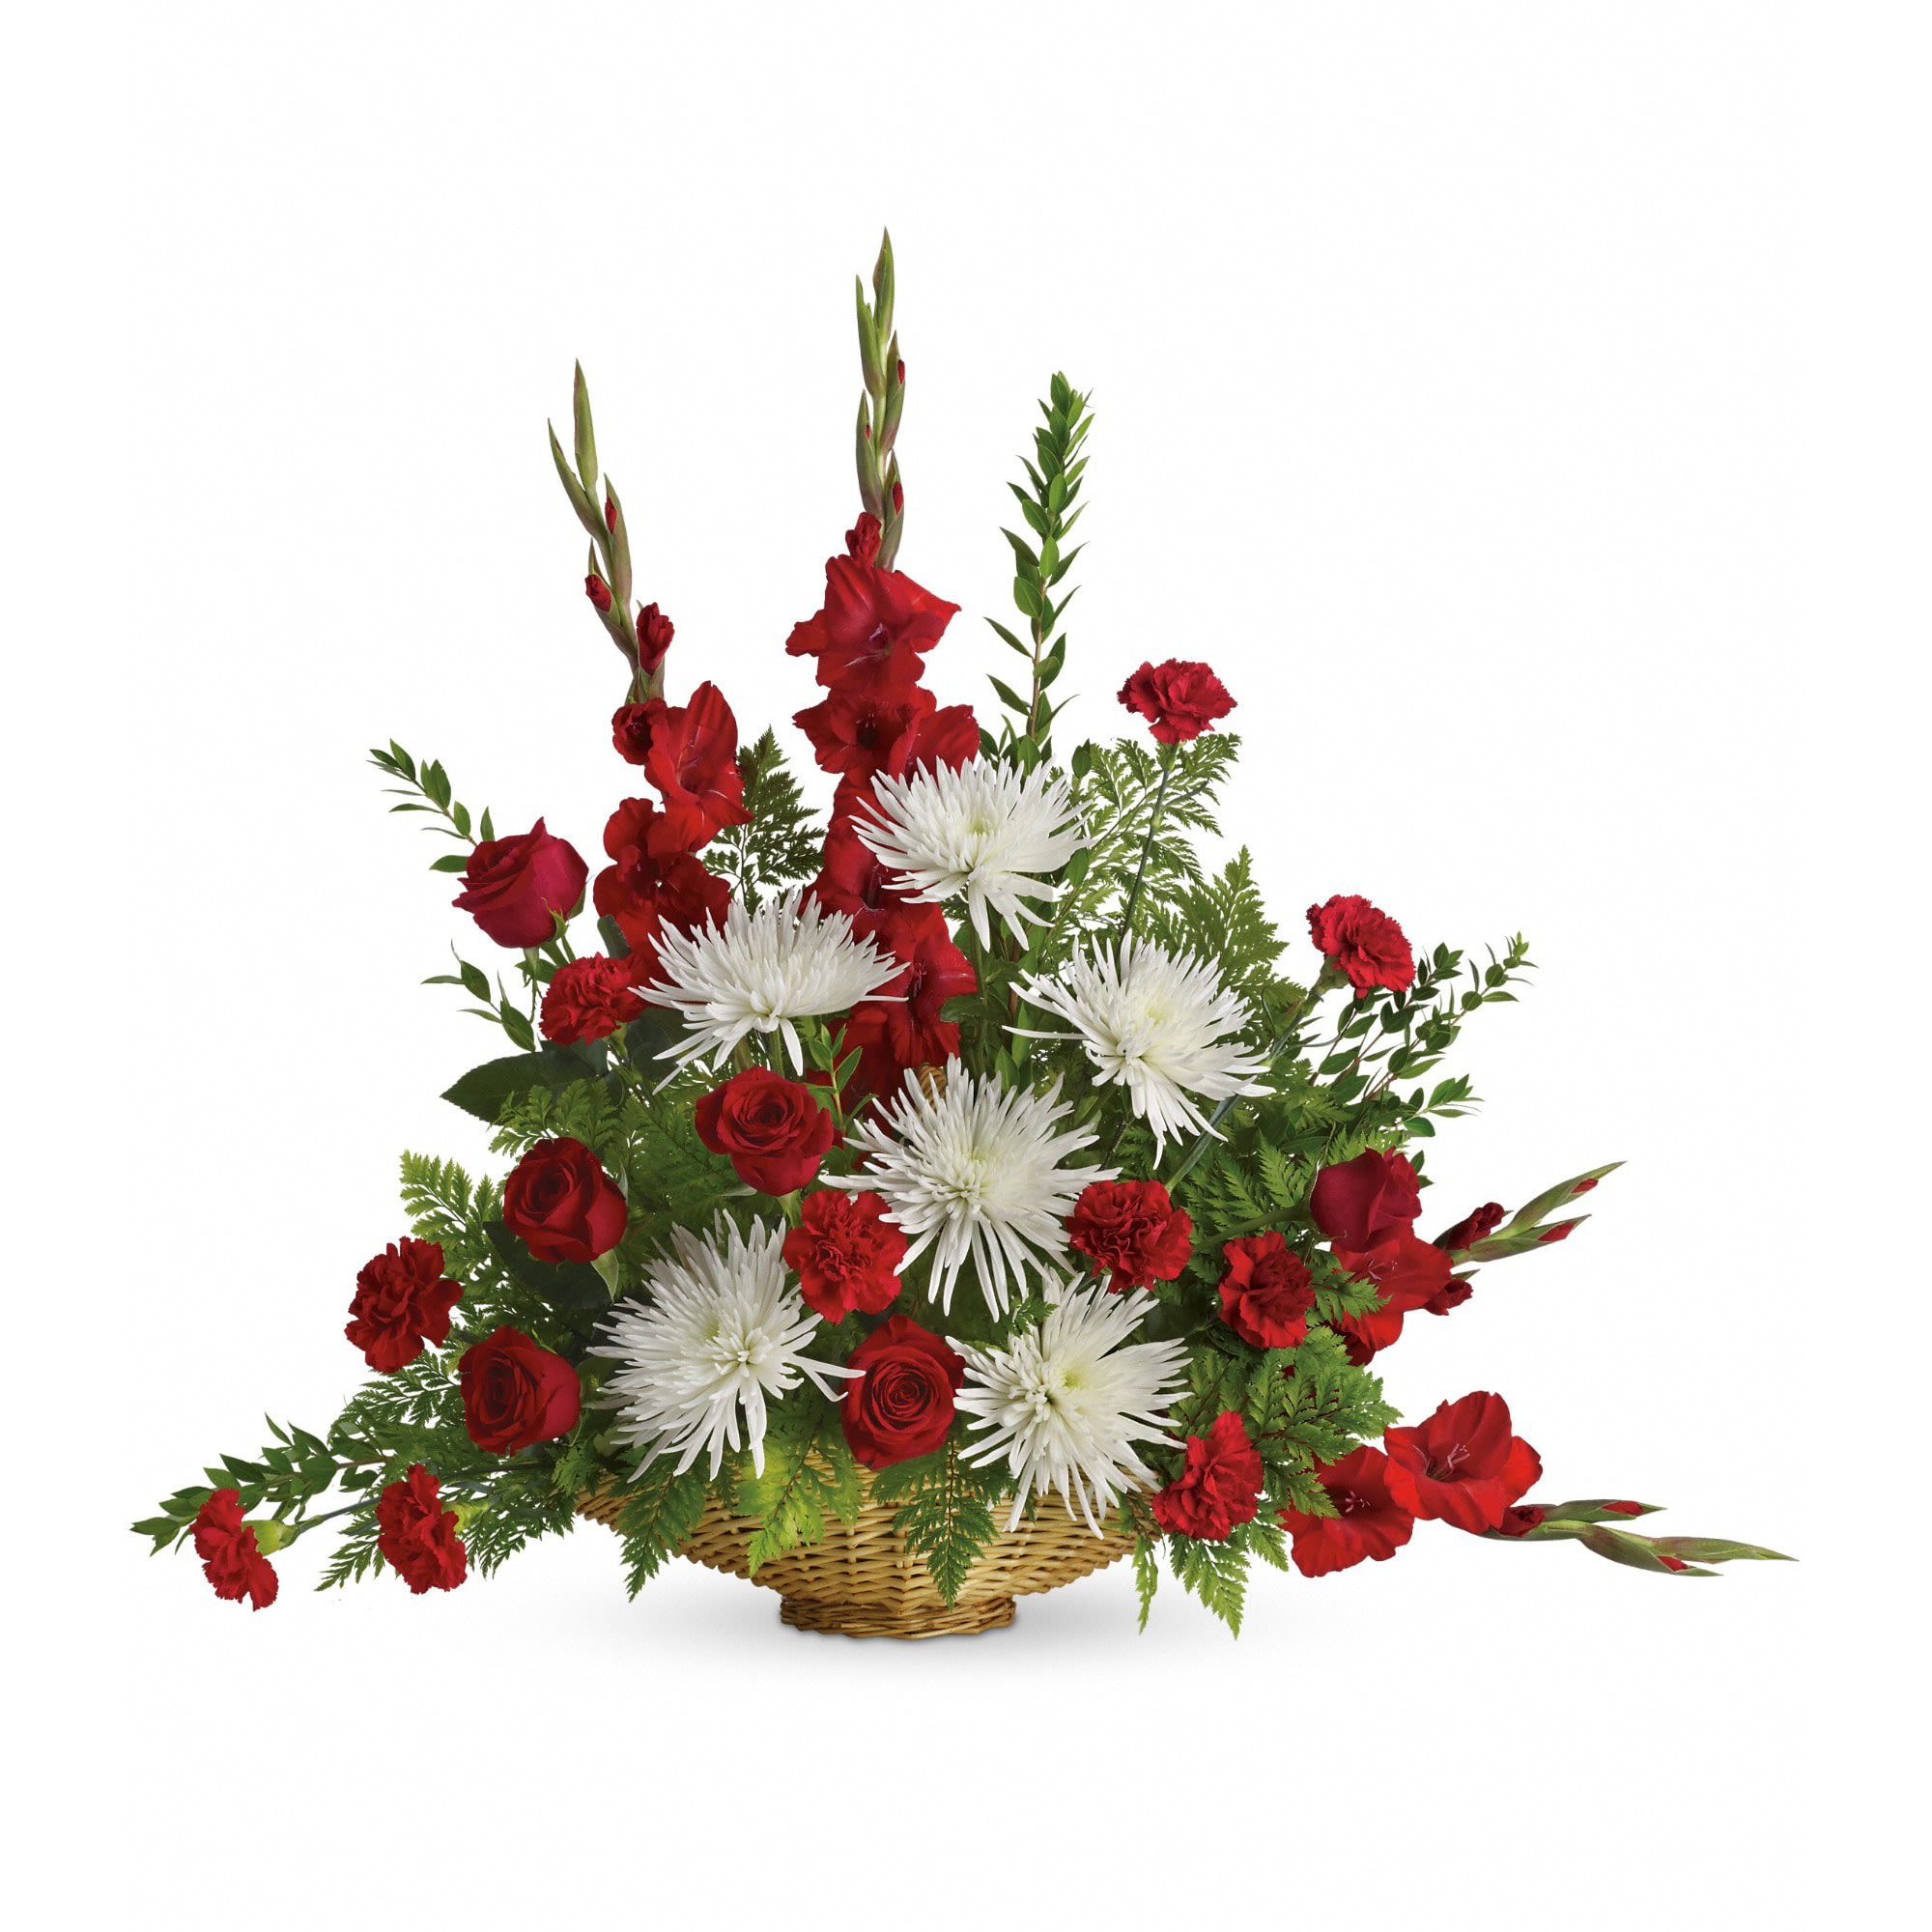 Enduring Grace by Teleflora - This beautiful, tasteful arrangement of classic red and white flowers is a lovely expression of caring. It will be a comfort to the family, who will long remember your thoughtfulness during a time of loss.  